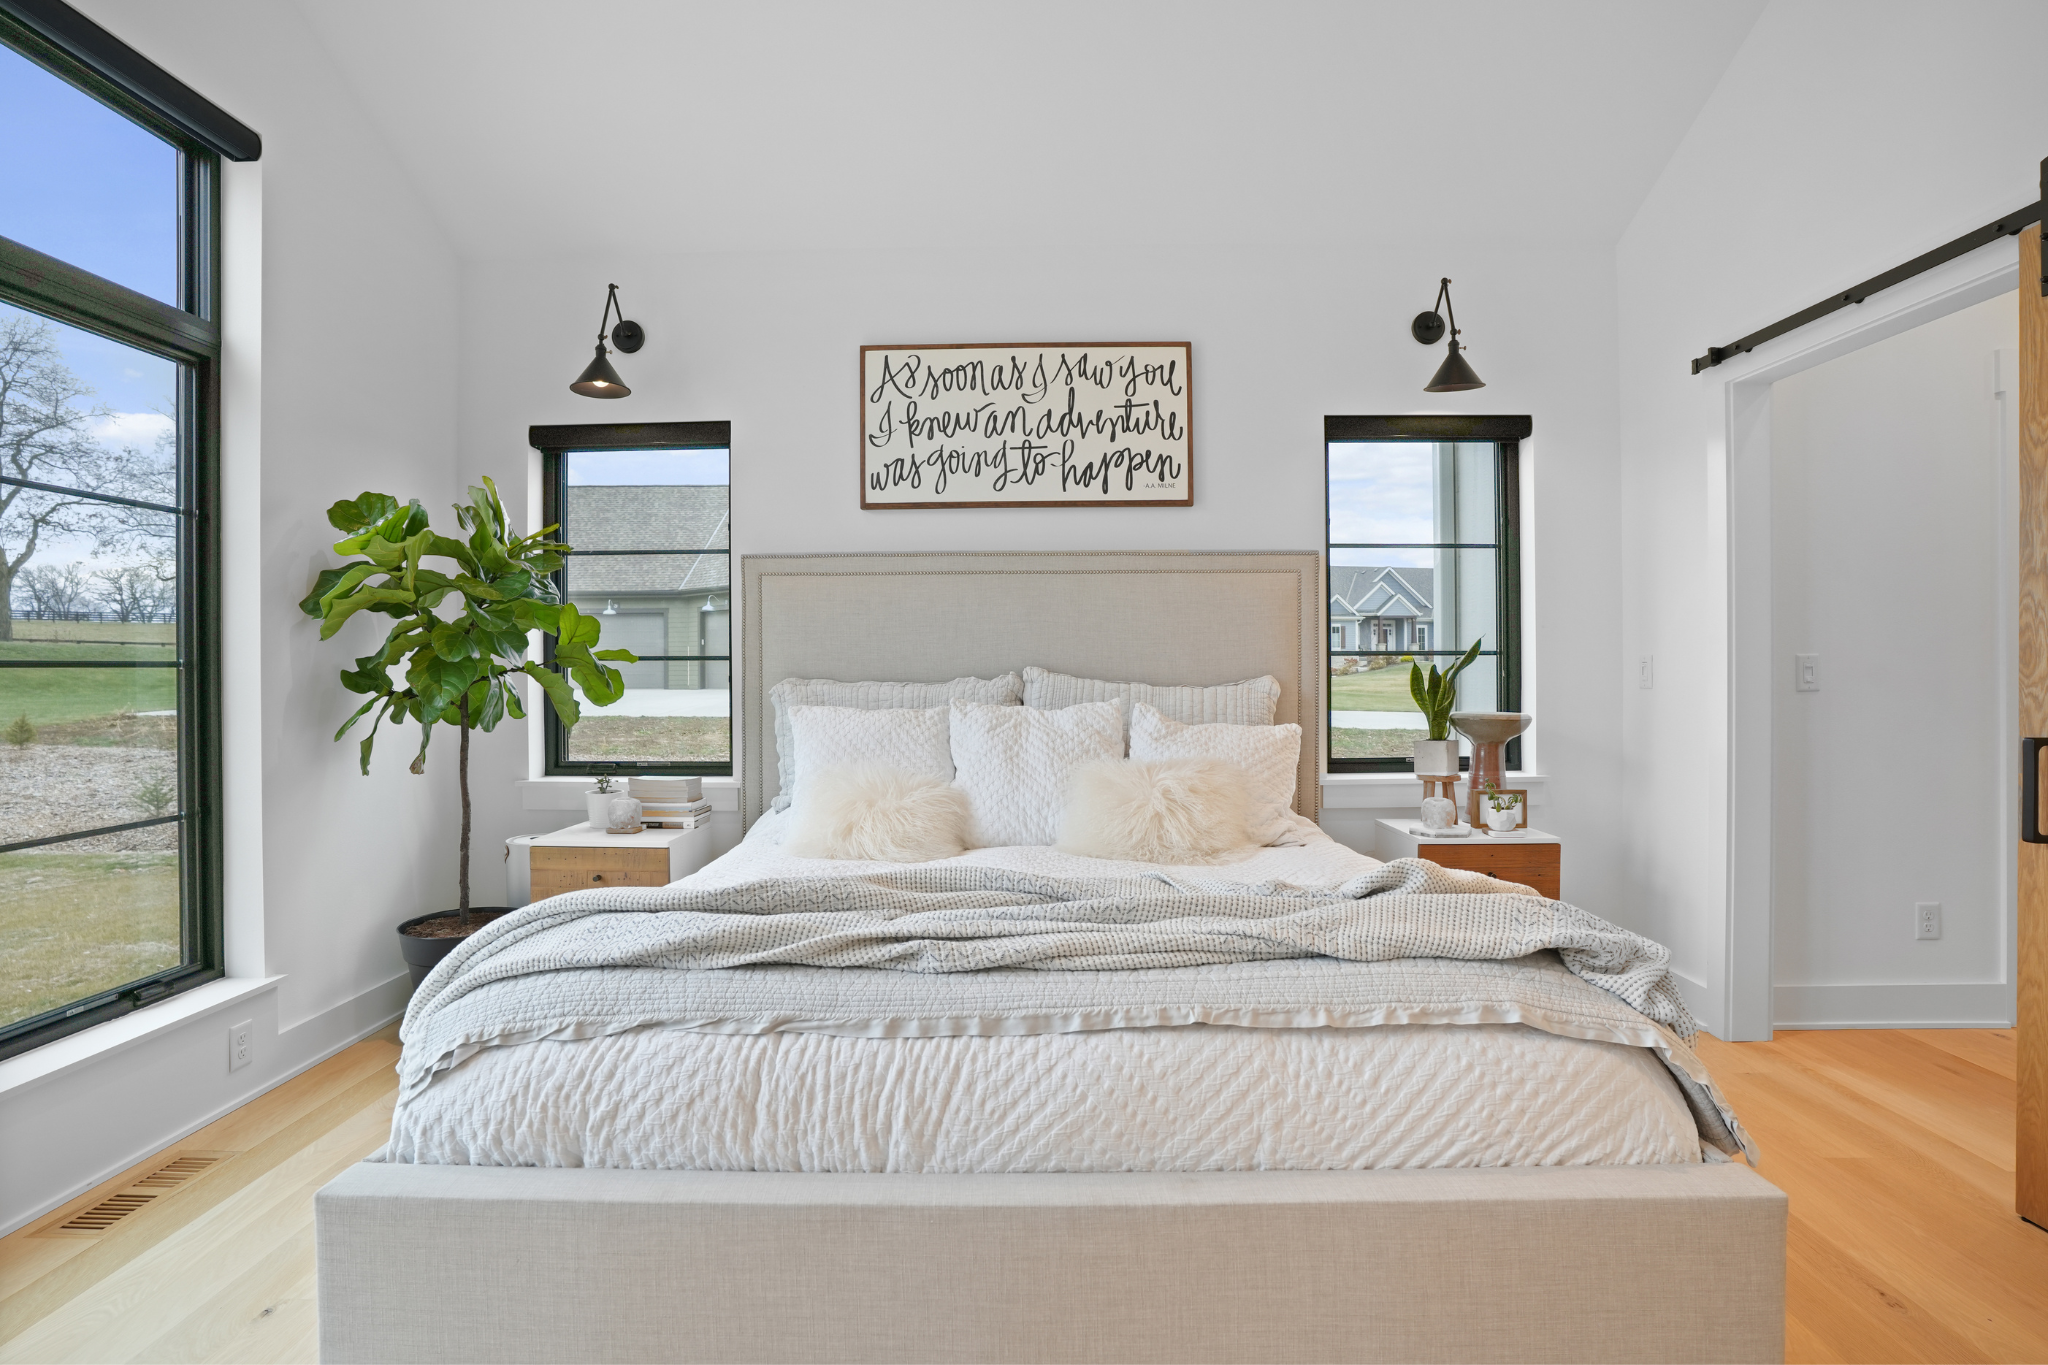 Bright and airy bedroom with large windows, designed by Residential Architects Wisconsin.